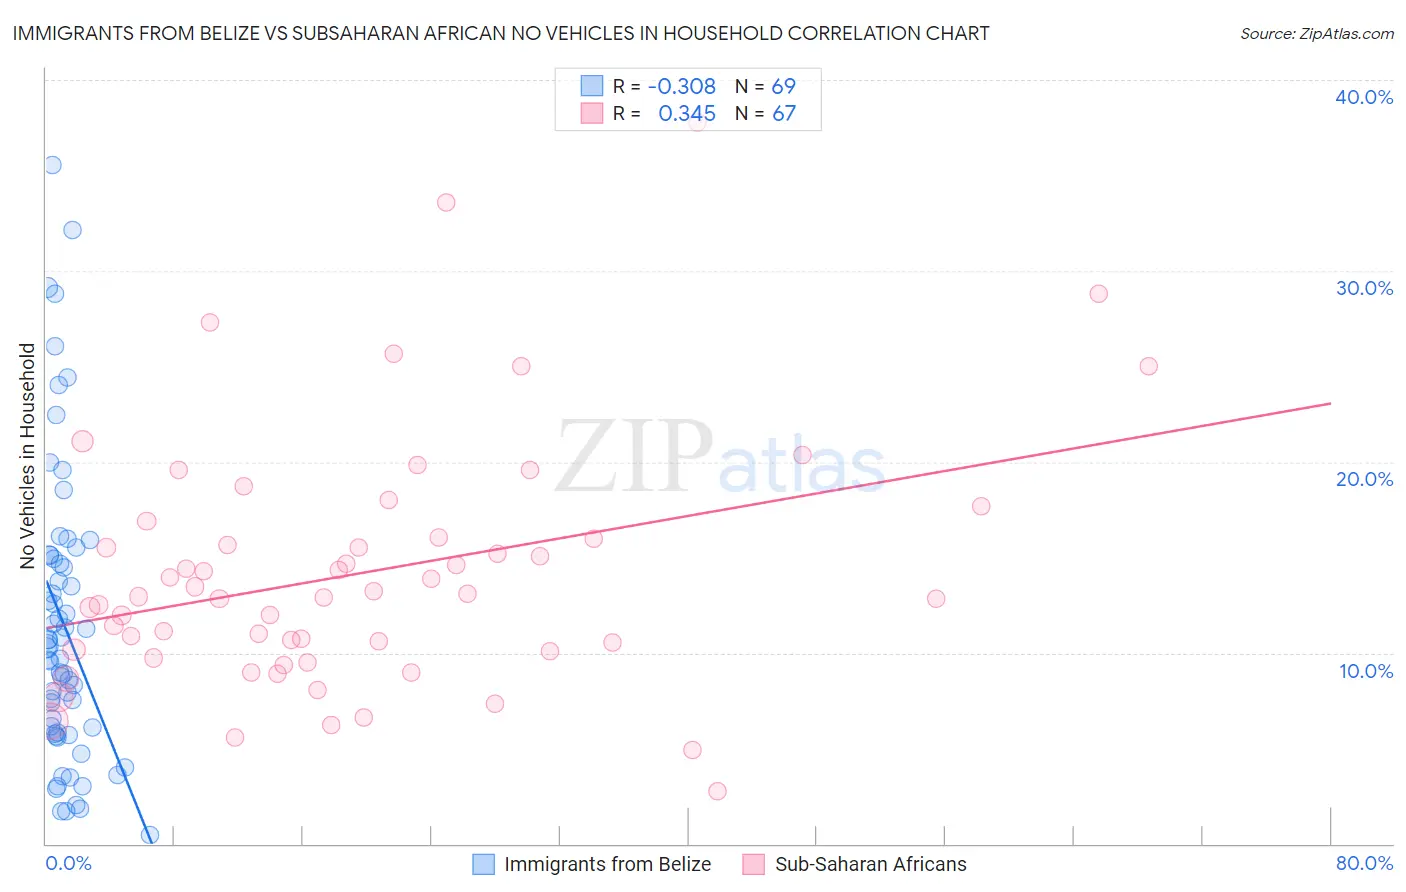 Immigrants from Belize vs Subsaharan African No Vehicles in Household